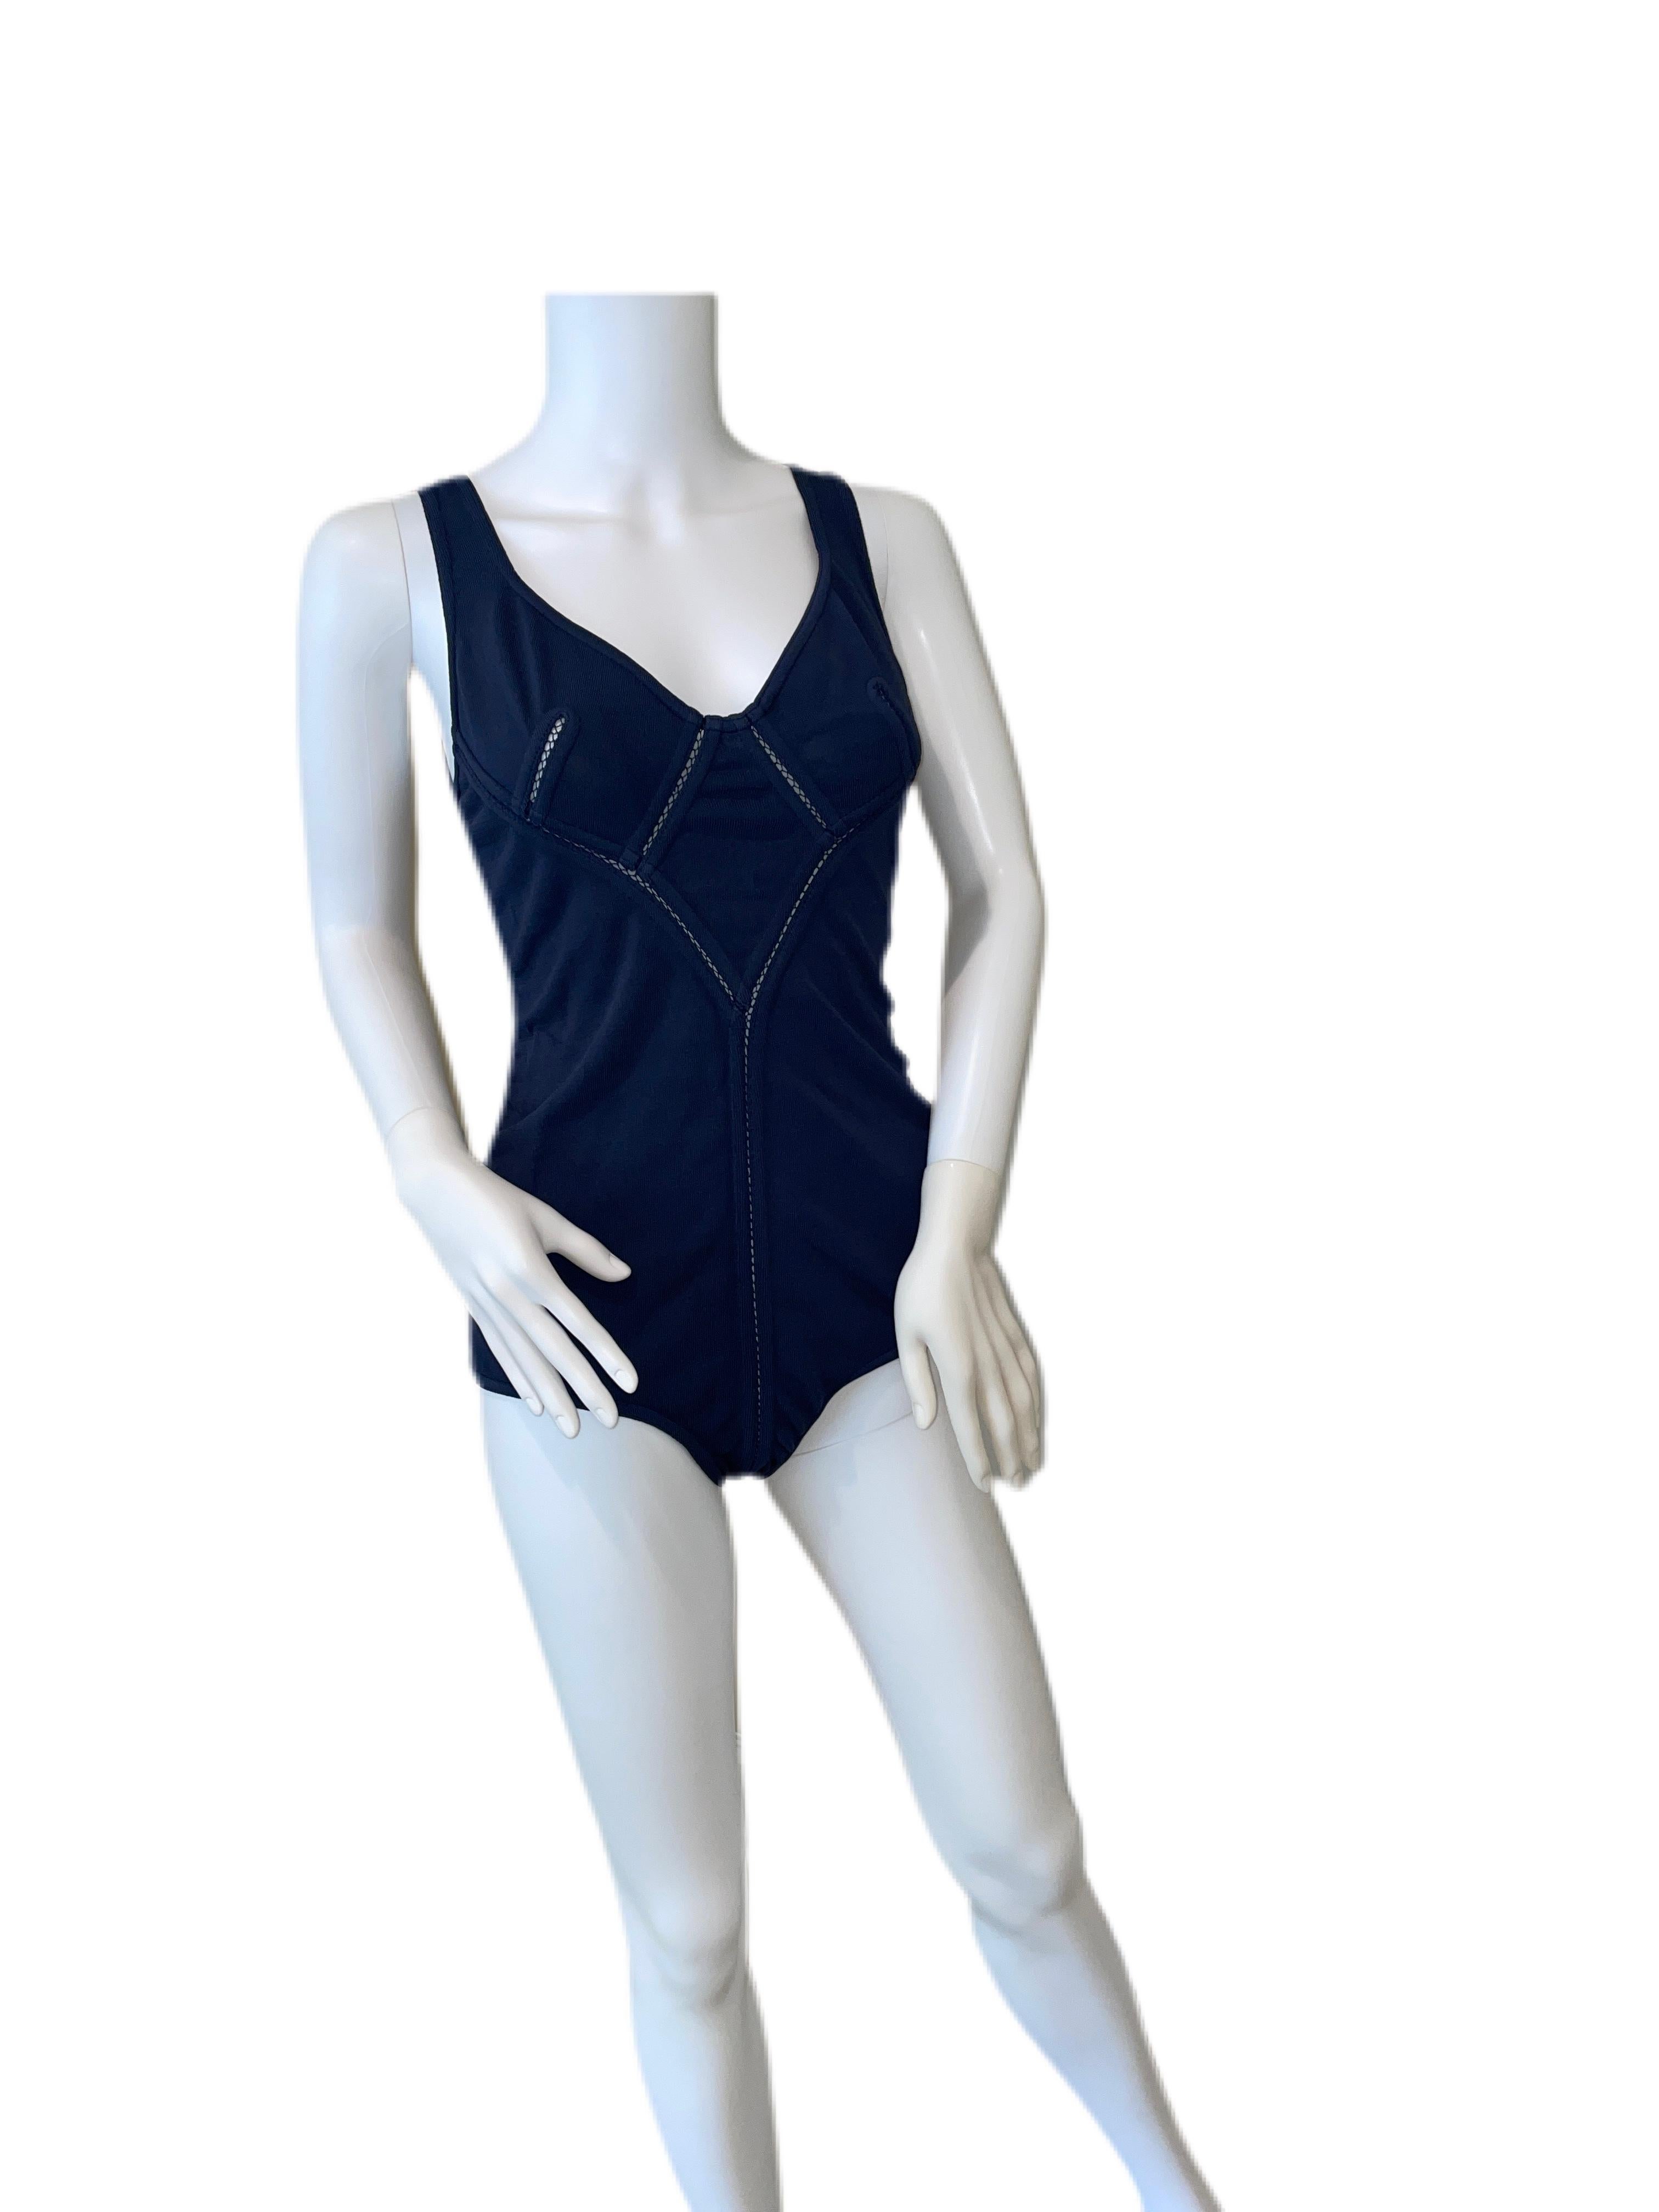 Vintage 1988 Azzedine Alaia sleeveless navy blue open stitch detail bodysuit. Size Medium with lots of stretch. Truly no flaws.